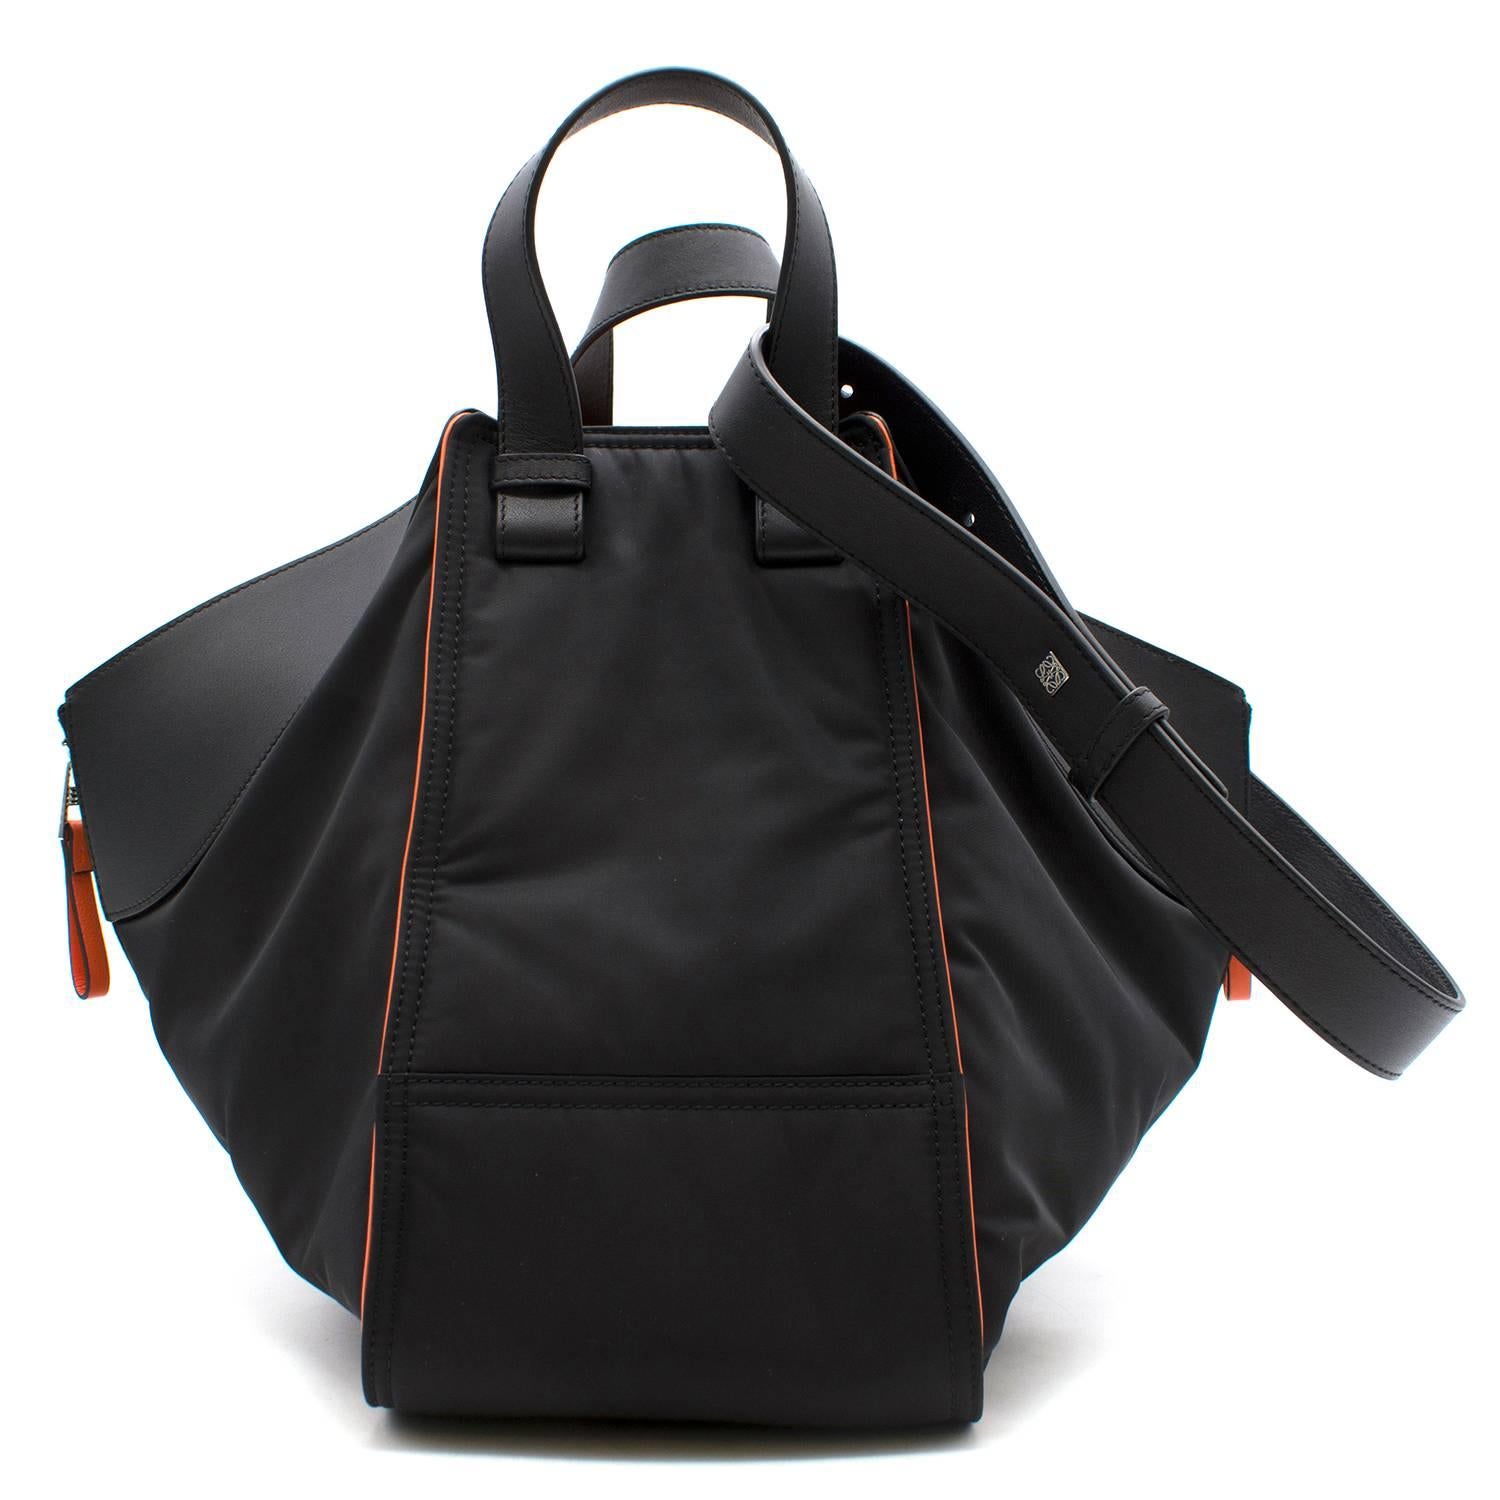 Loewe black hammock bomber bag

Featuring:
-expandable zip gusset at sides
-protective metal feet
-silvertone hardware
-lined with orange herringbone fabric
-two small interior slip pockets 
-leather handles, detachable,
adjustable strap
- front